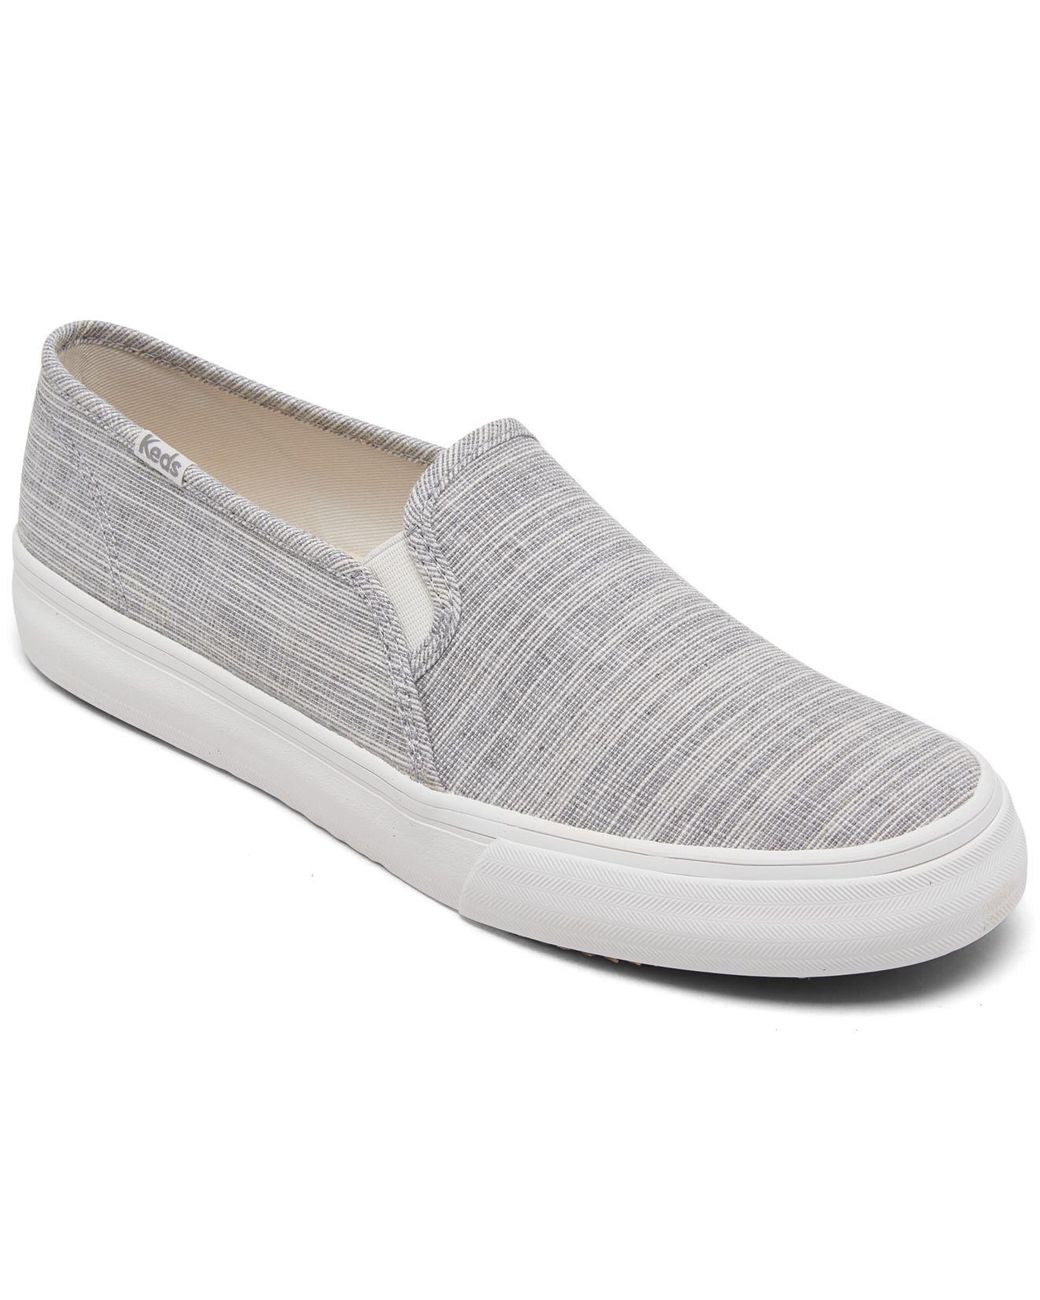 Keds Double Decker Canvas Slip-on Casual Sneakers From Finish Line in ...